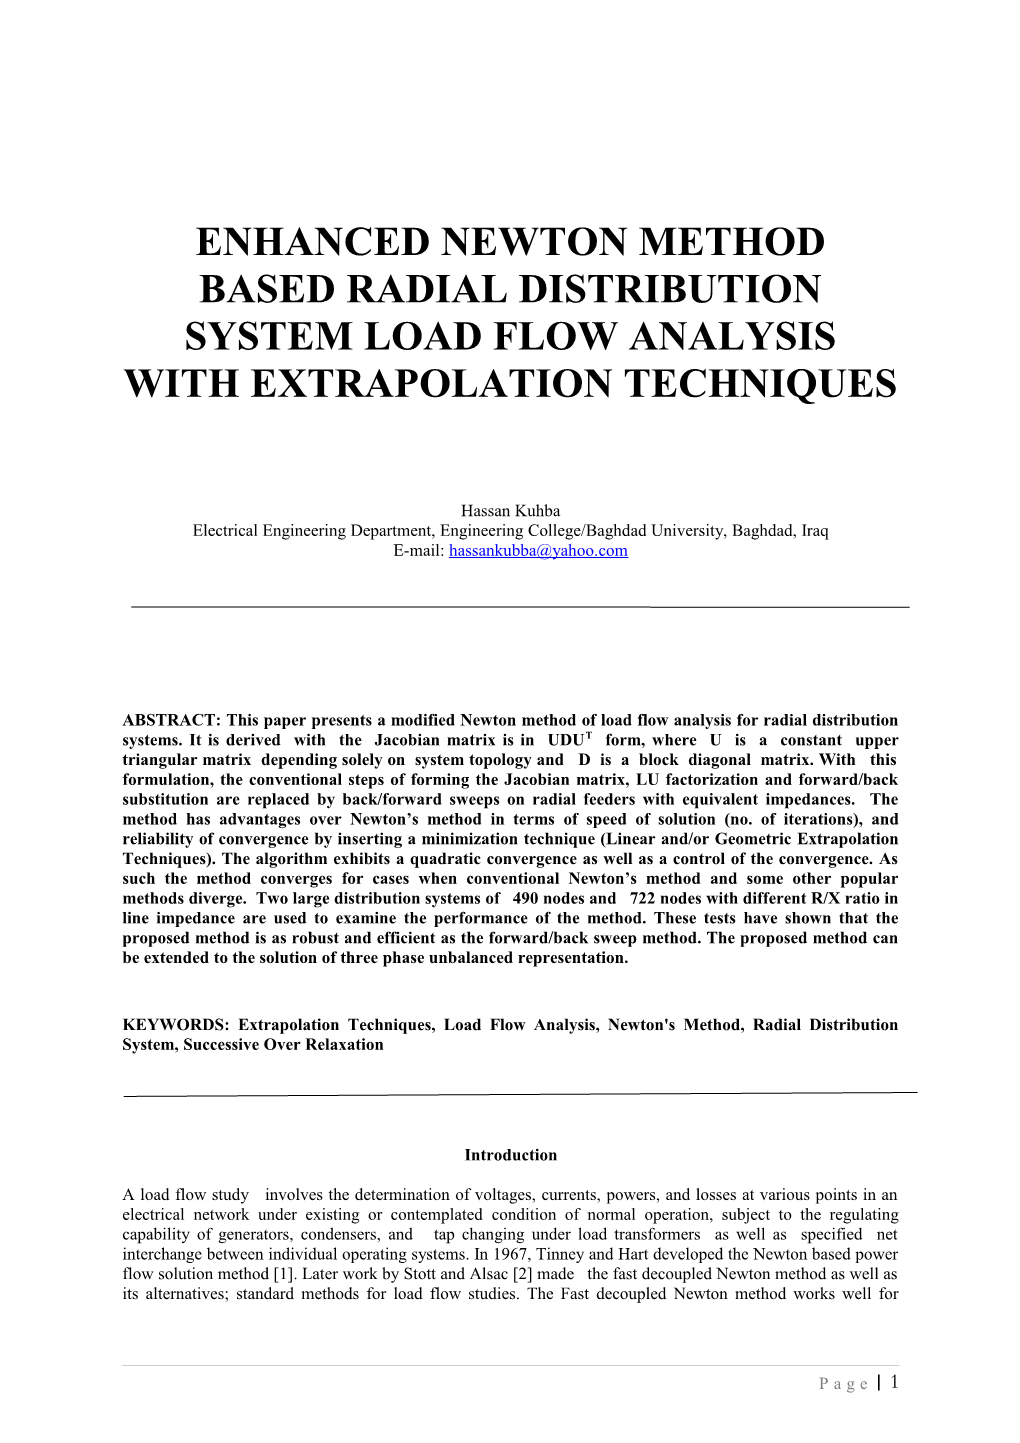 An Improved Newton Method for Radial Distribution System Load Analysis